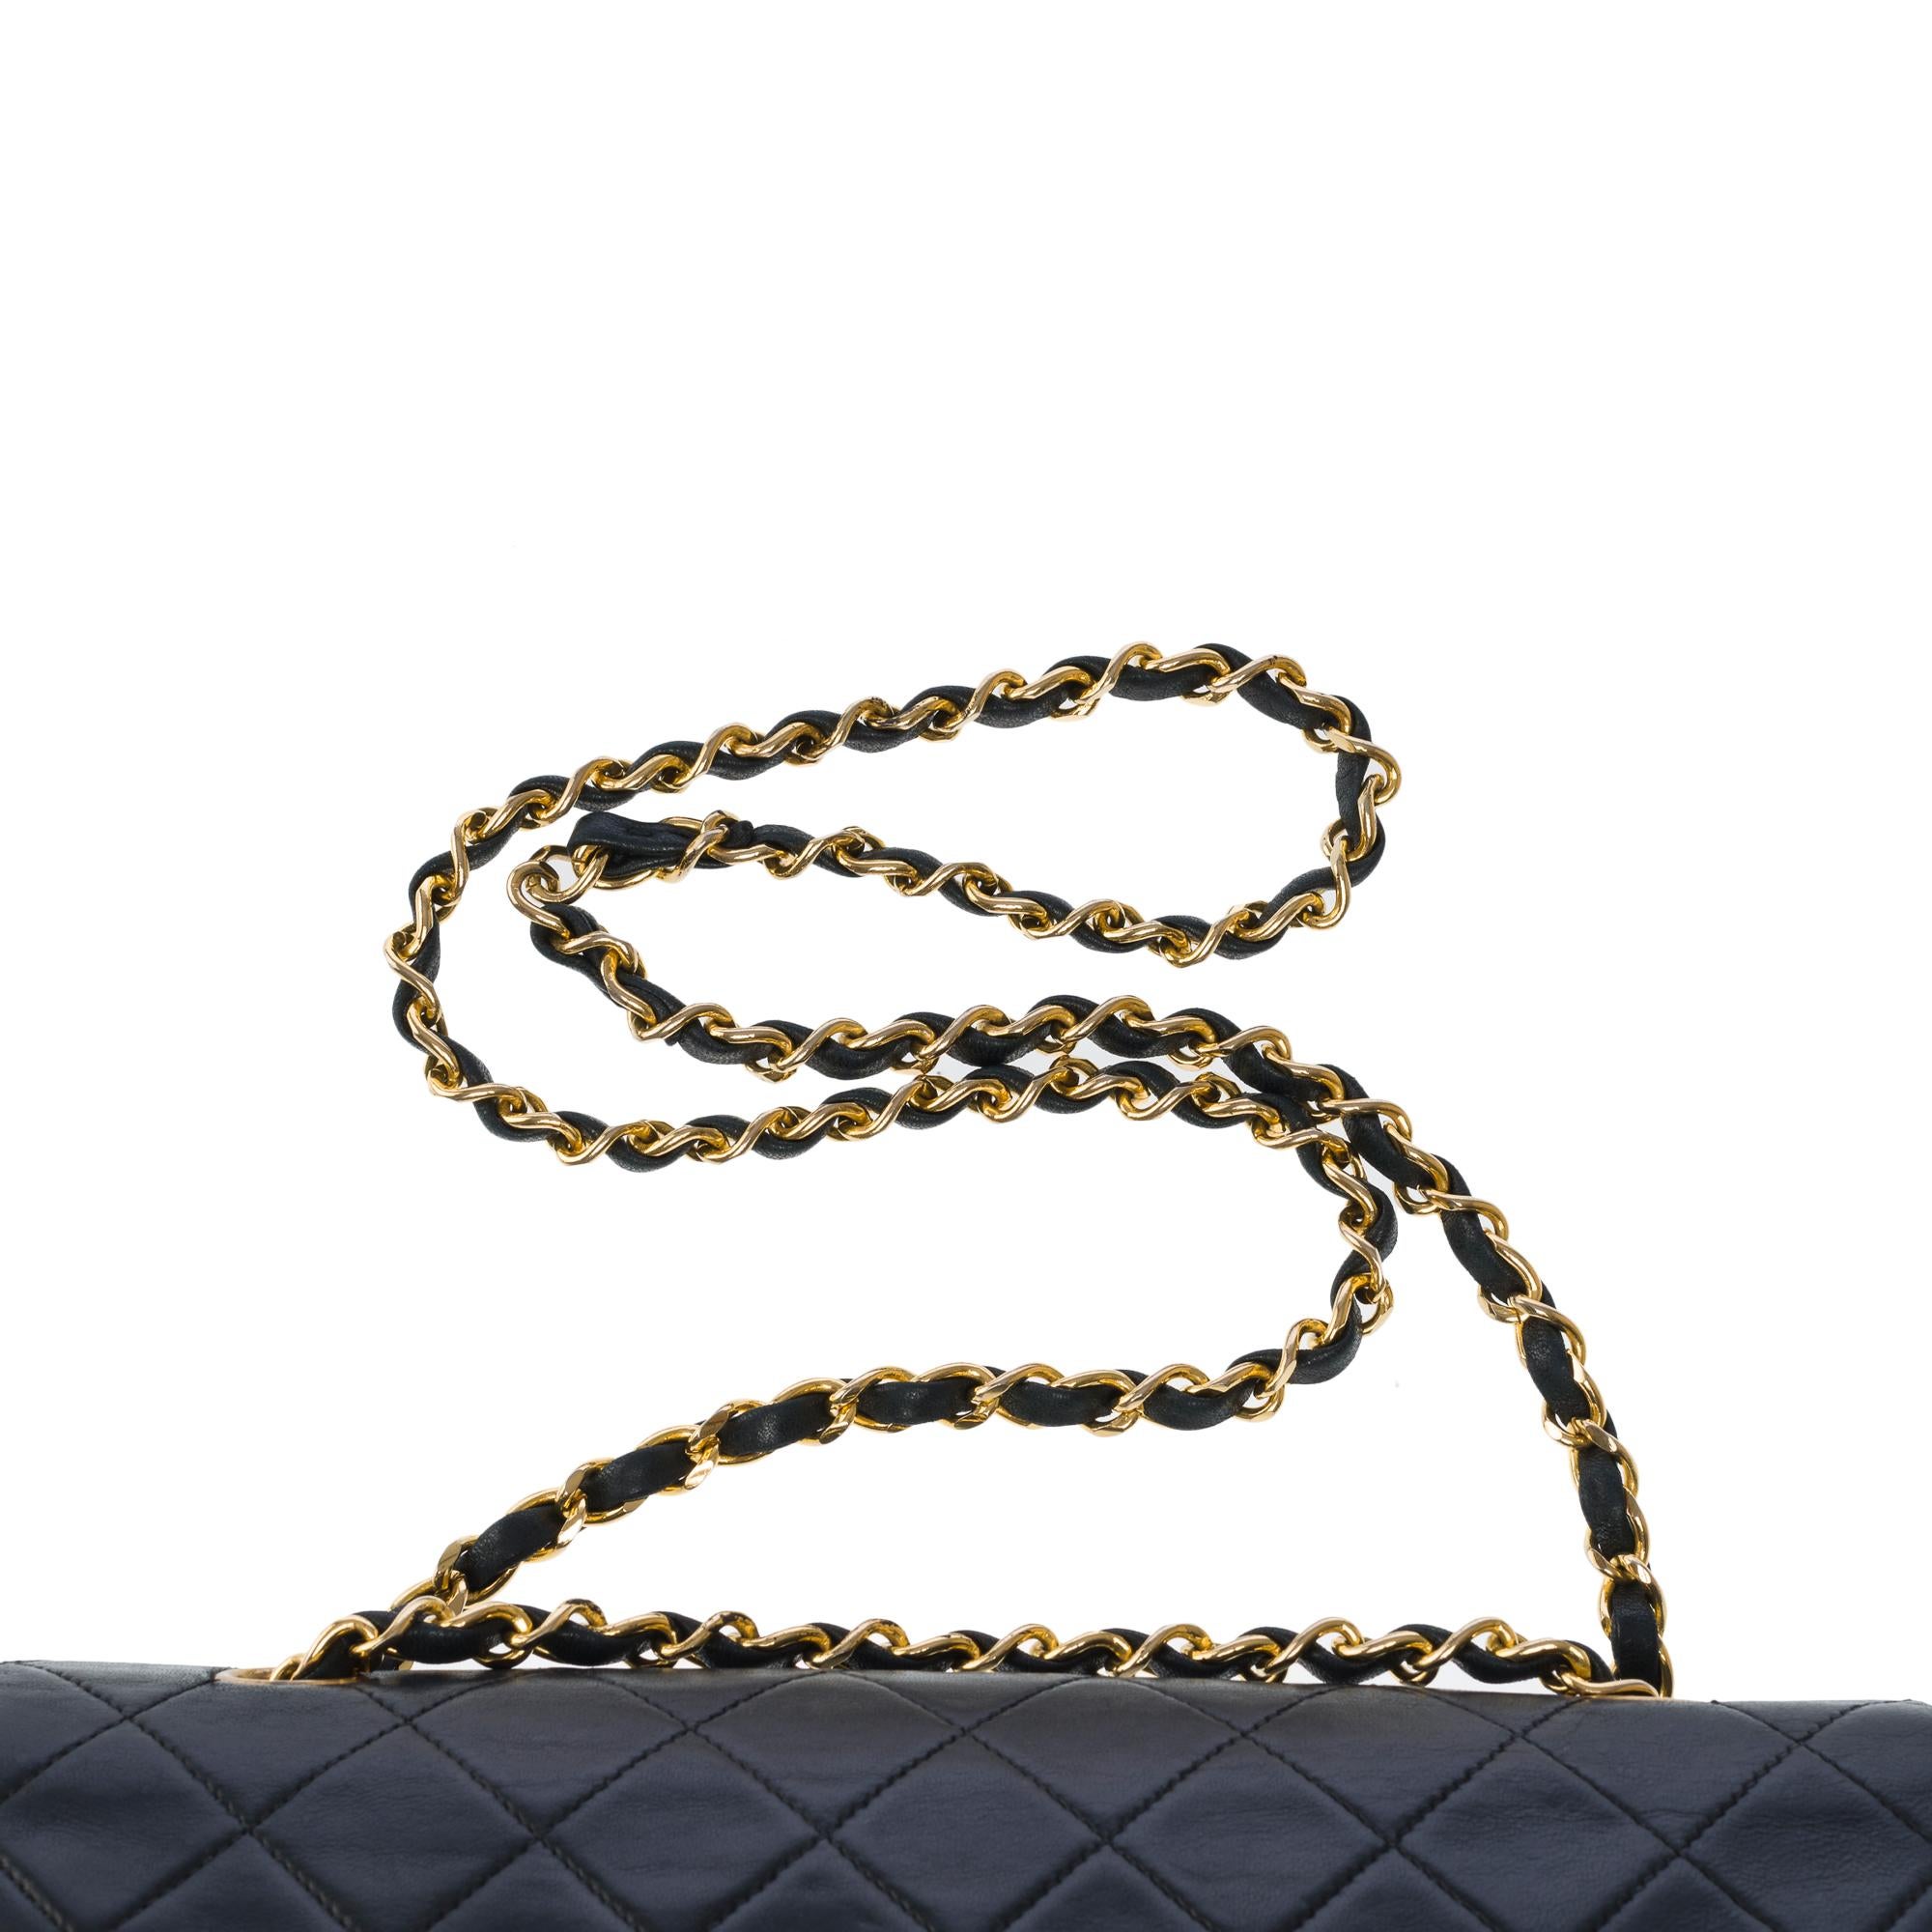 Chanel Timeless double flap shoulder bag in black quilted lambskin leather, GHW For Sale 6